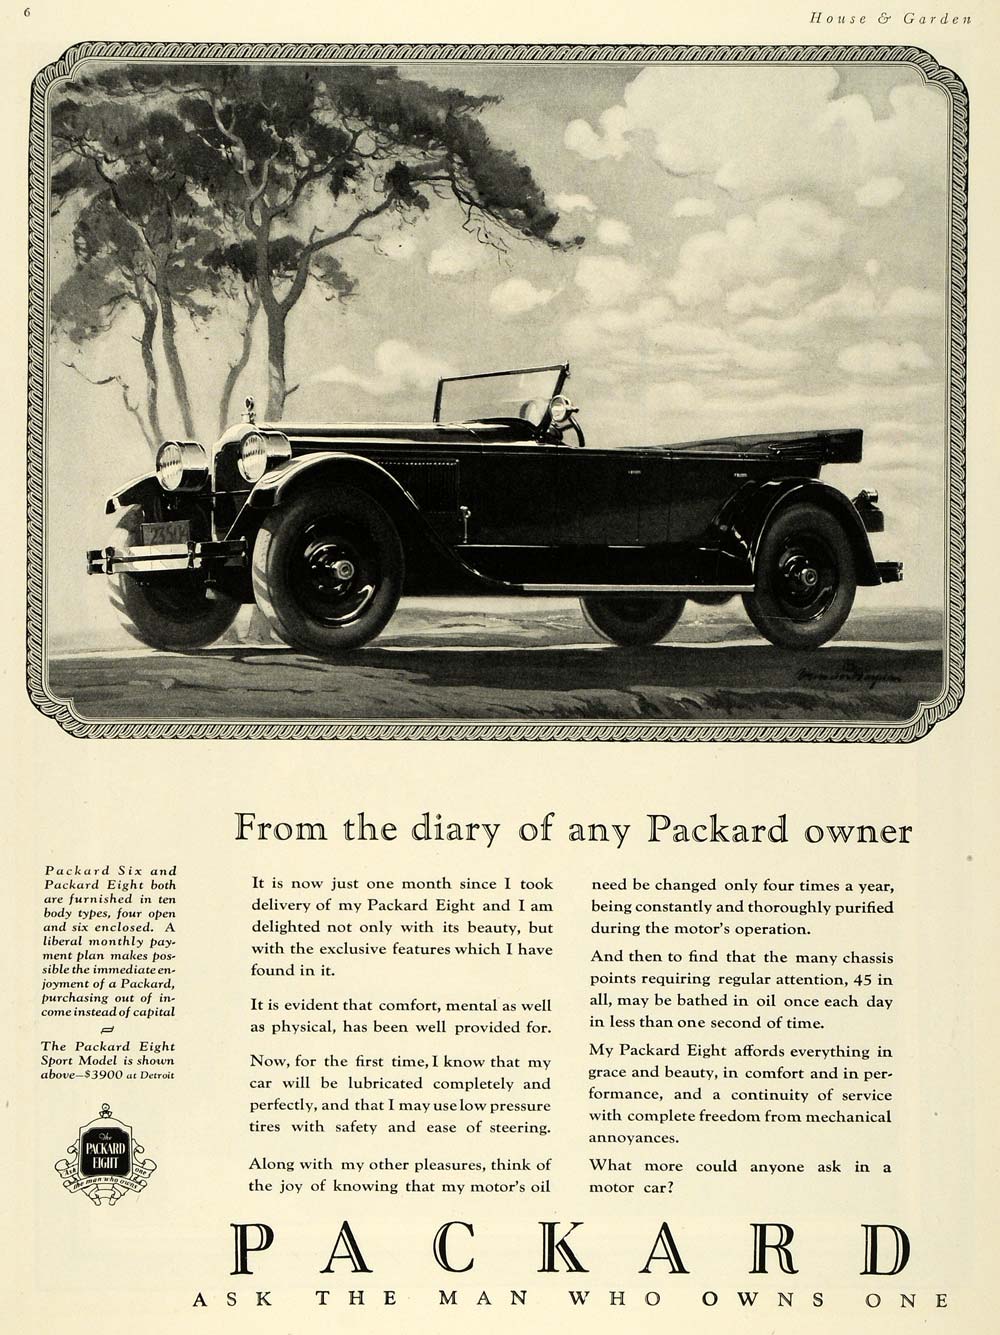 1925 Ad Packard Eight Model Automobile Car Vehicle - ORIGINAL ADVERTISING HG1